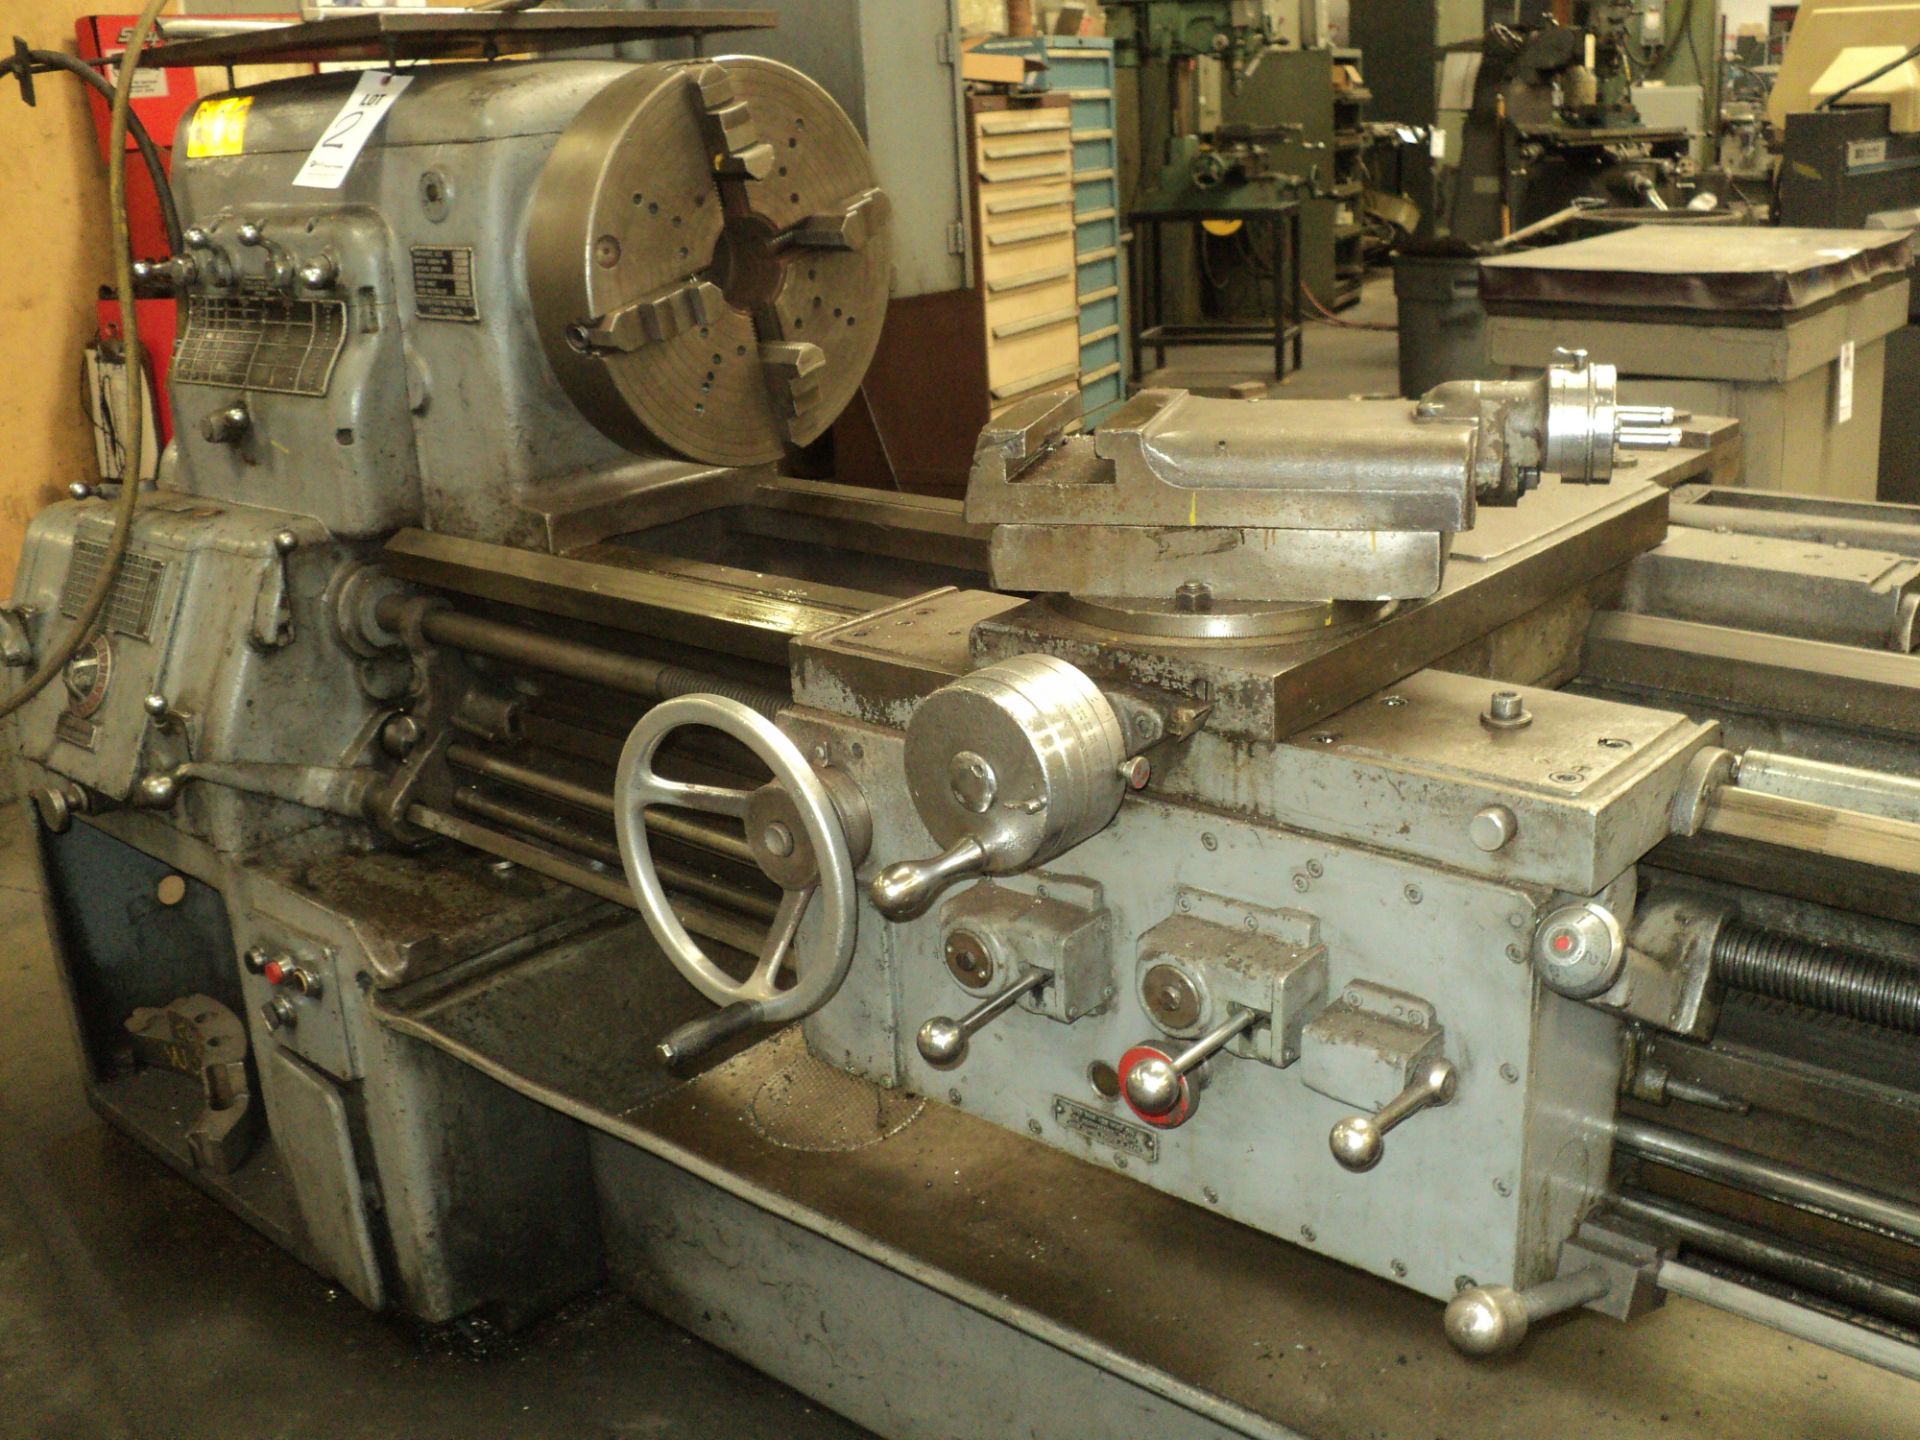 MONARCH ENGINE LATHE, 20" x 120" CCS, 12" 3 JAW CHUCK, TAILSTOCK, CROSS SLIDE, STEADY REST, TRACER - Image 5 of 5